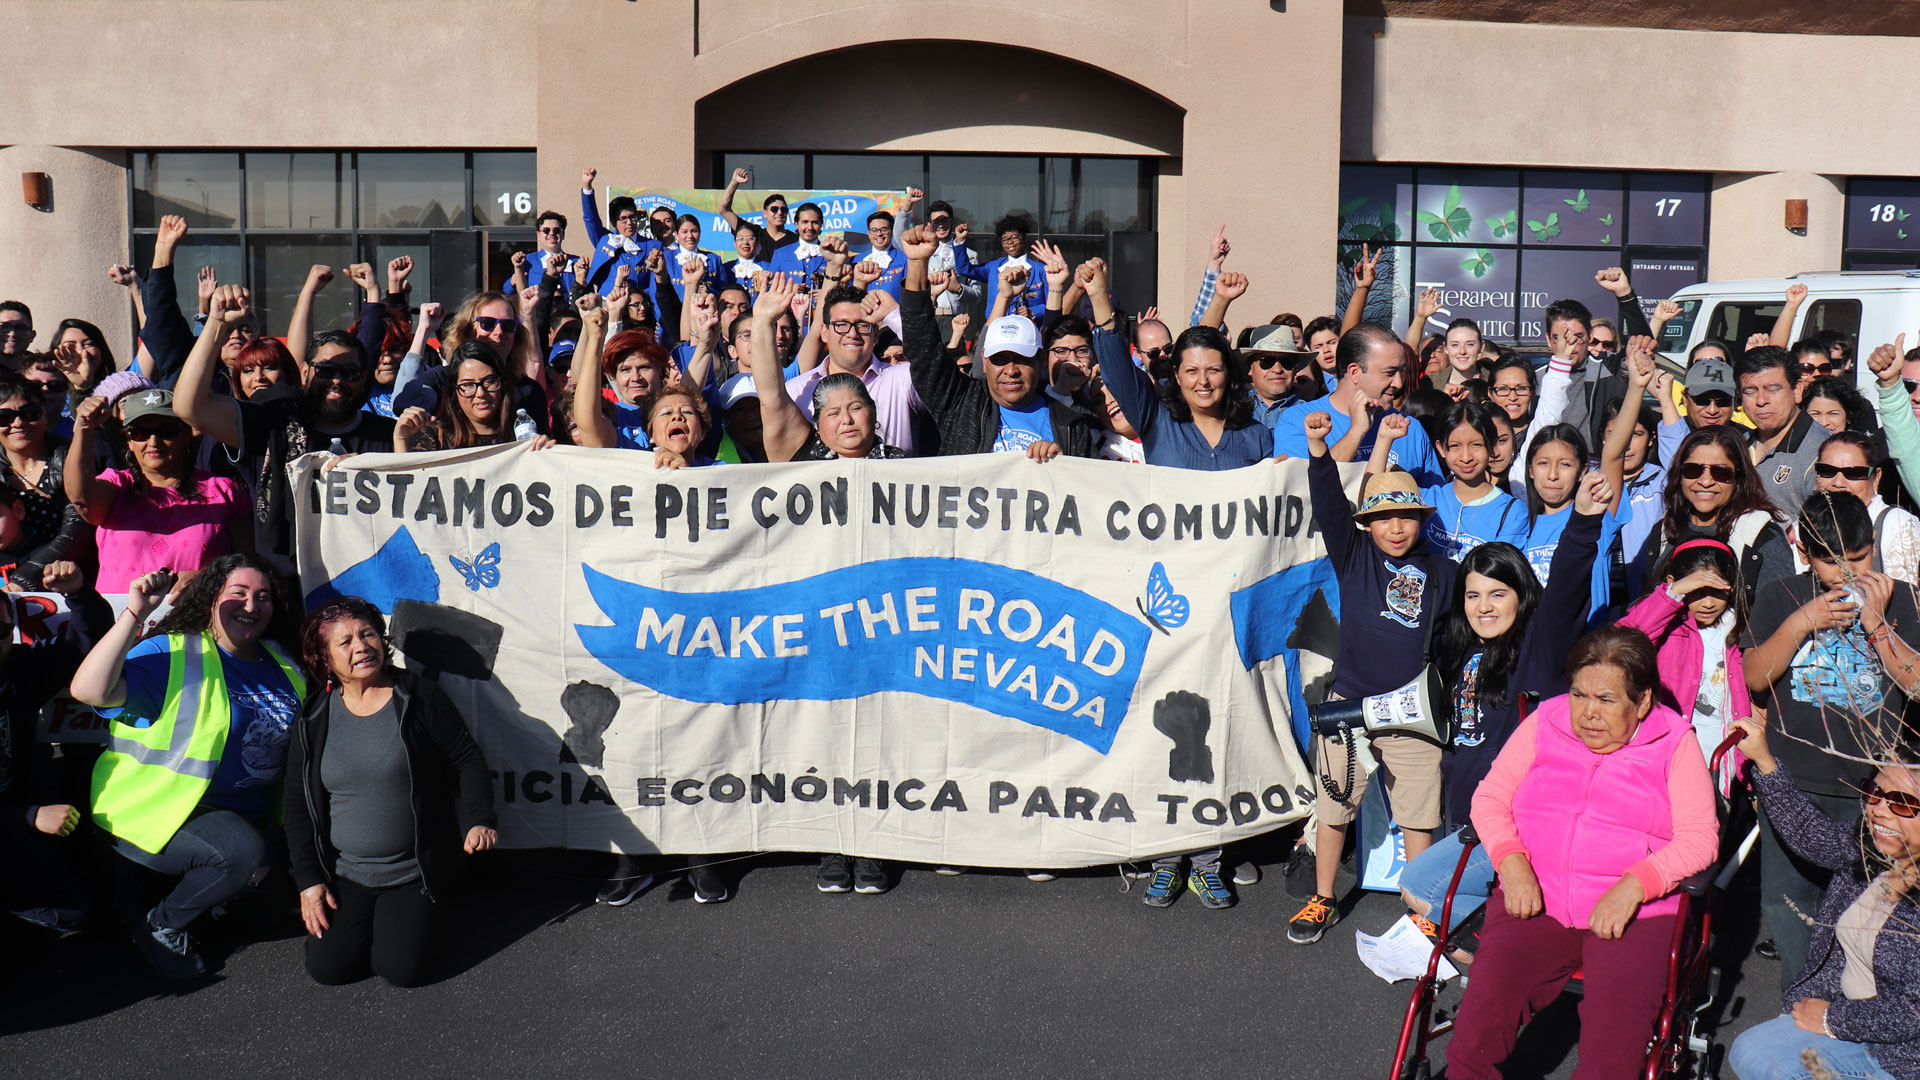 Make the Road Nevada staff members pose for a photo holding a banner in spanish